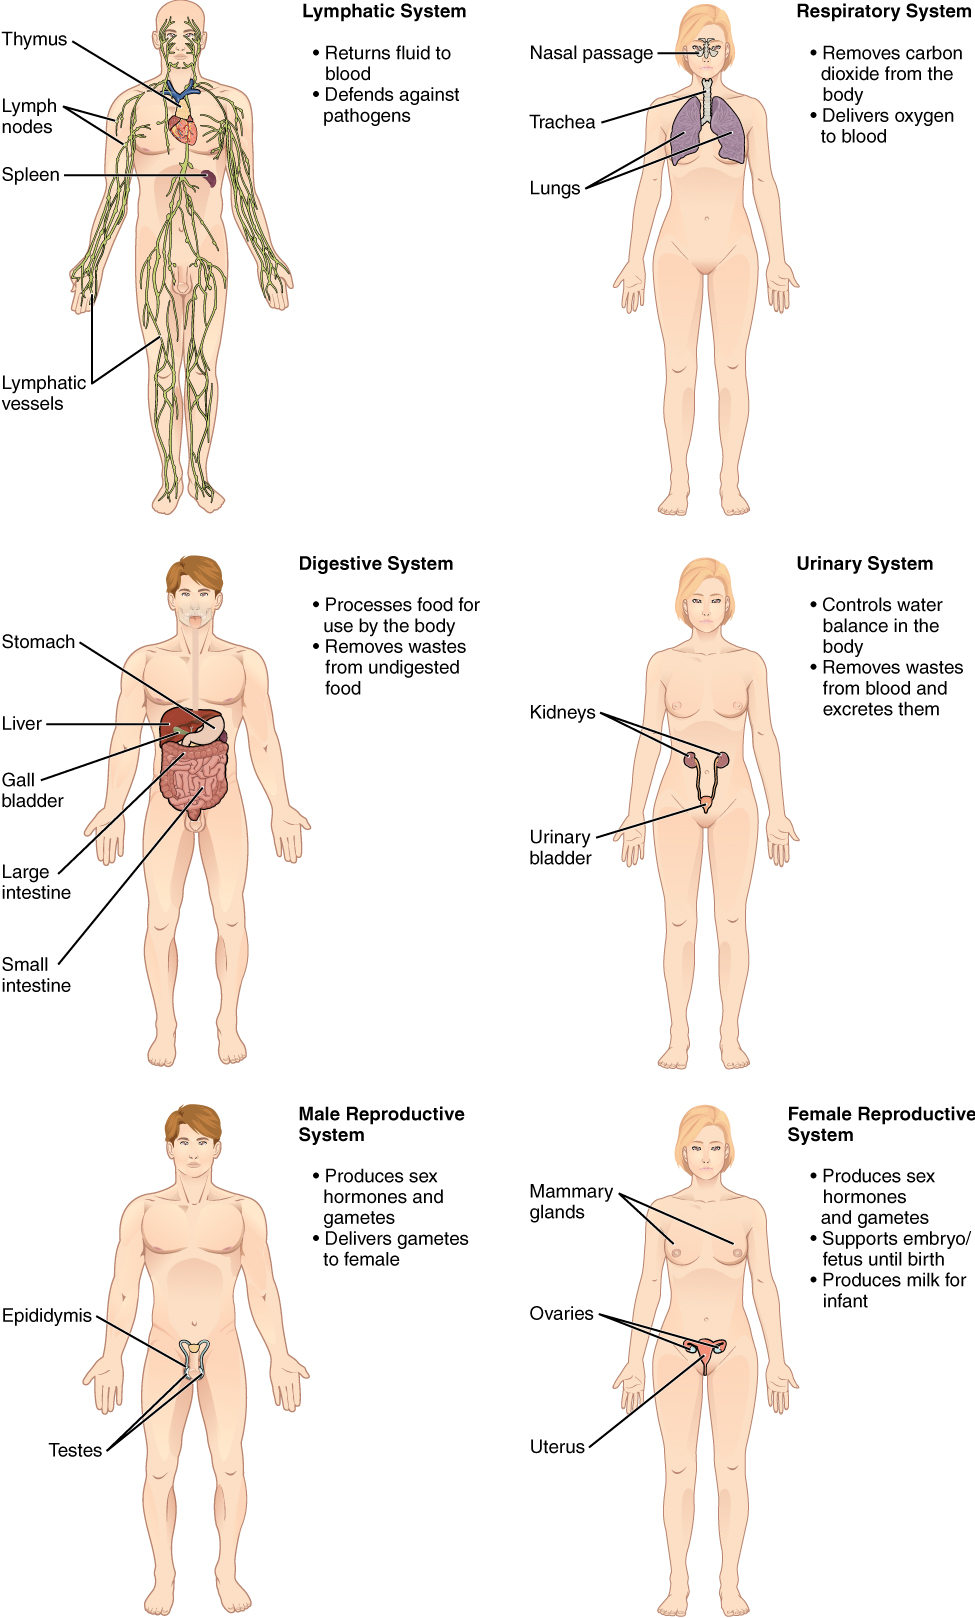 Some organ systems of the human body: the lymphatic system, respiratory system, digestive system, urinary system and reproductive systems - described in text.